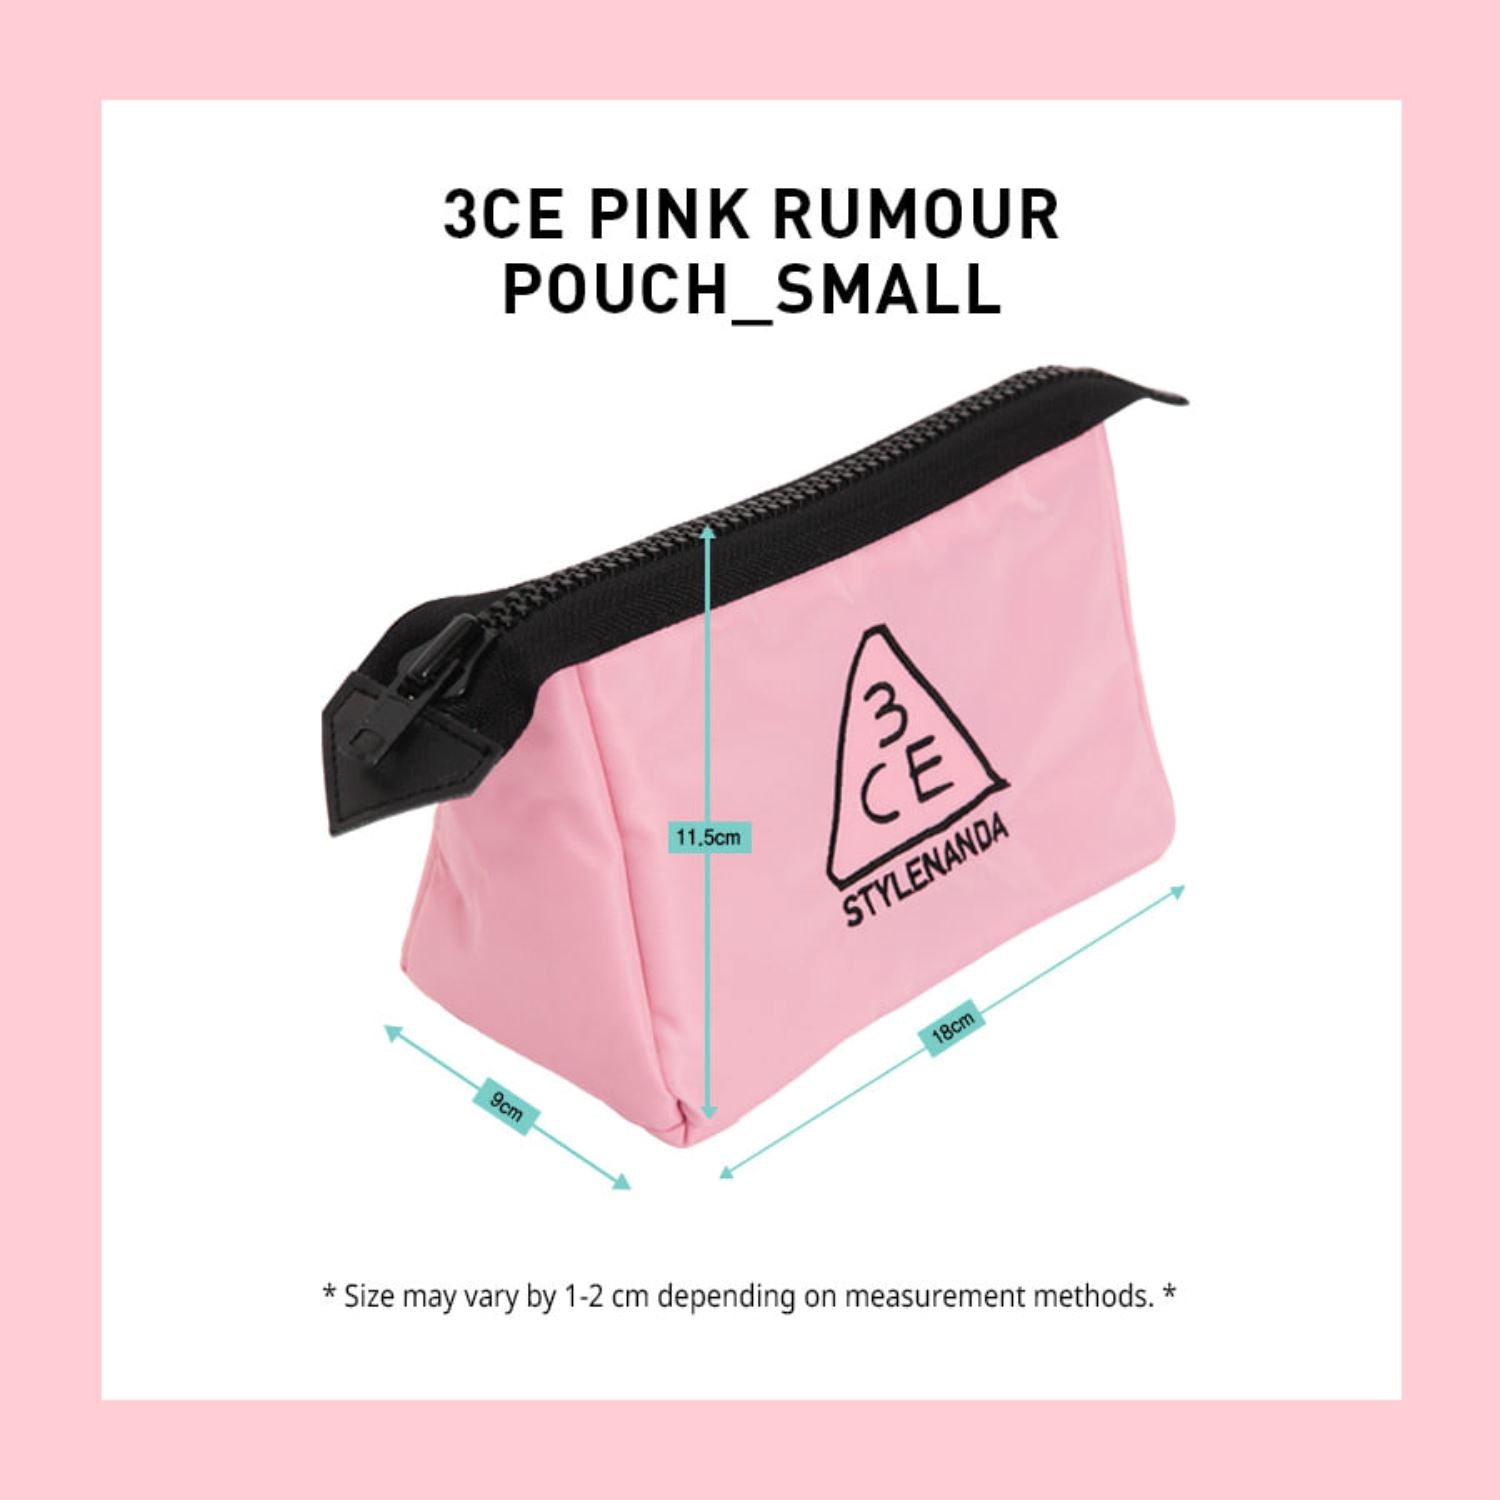 3CE Small Pouch Pink Rumour Small Size Makeup 3CE ORION XO Sri Lanka